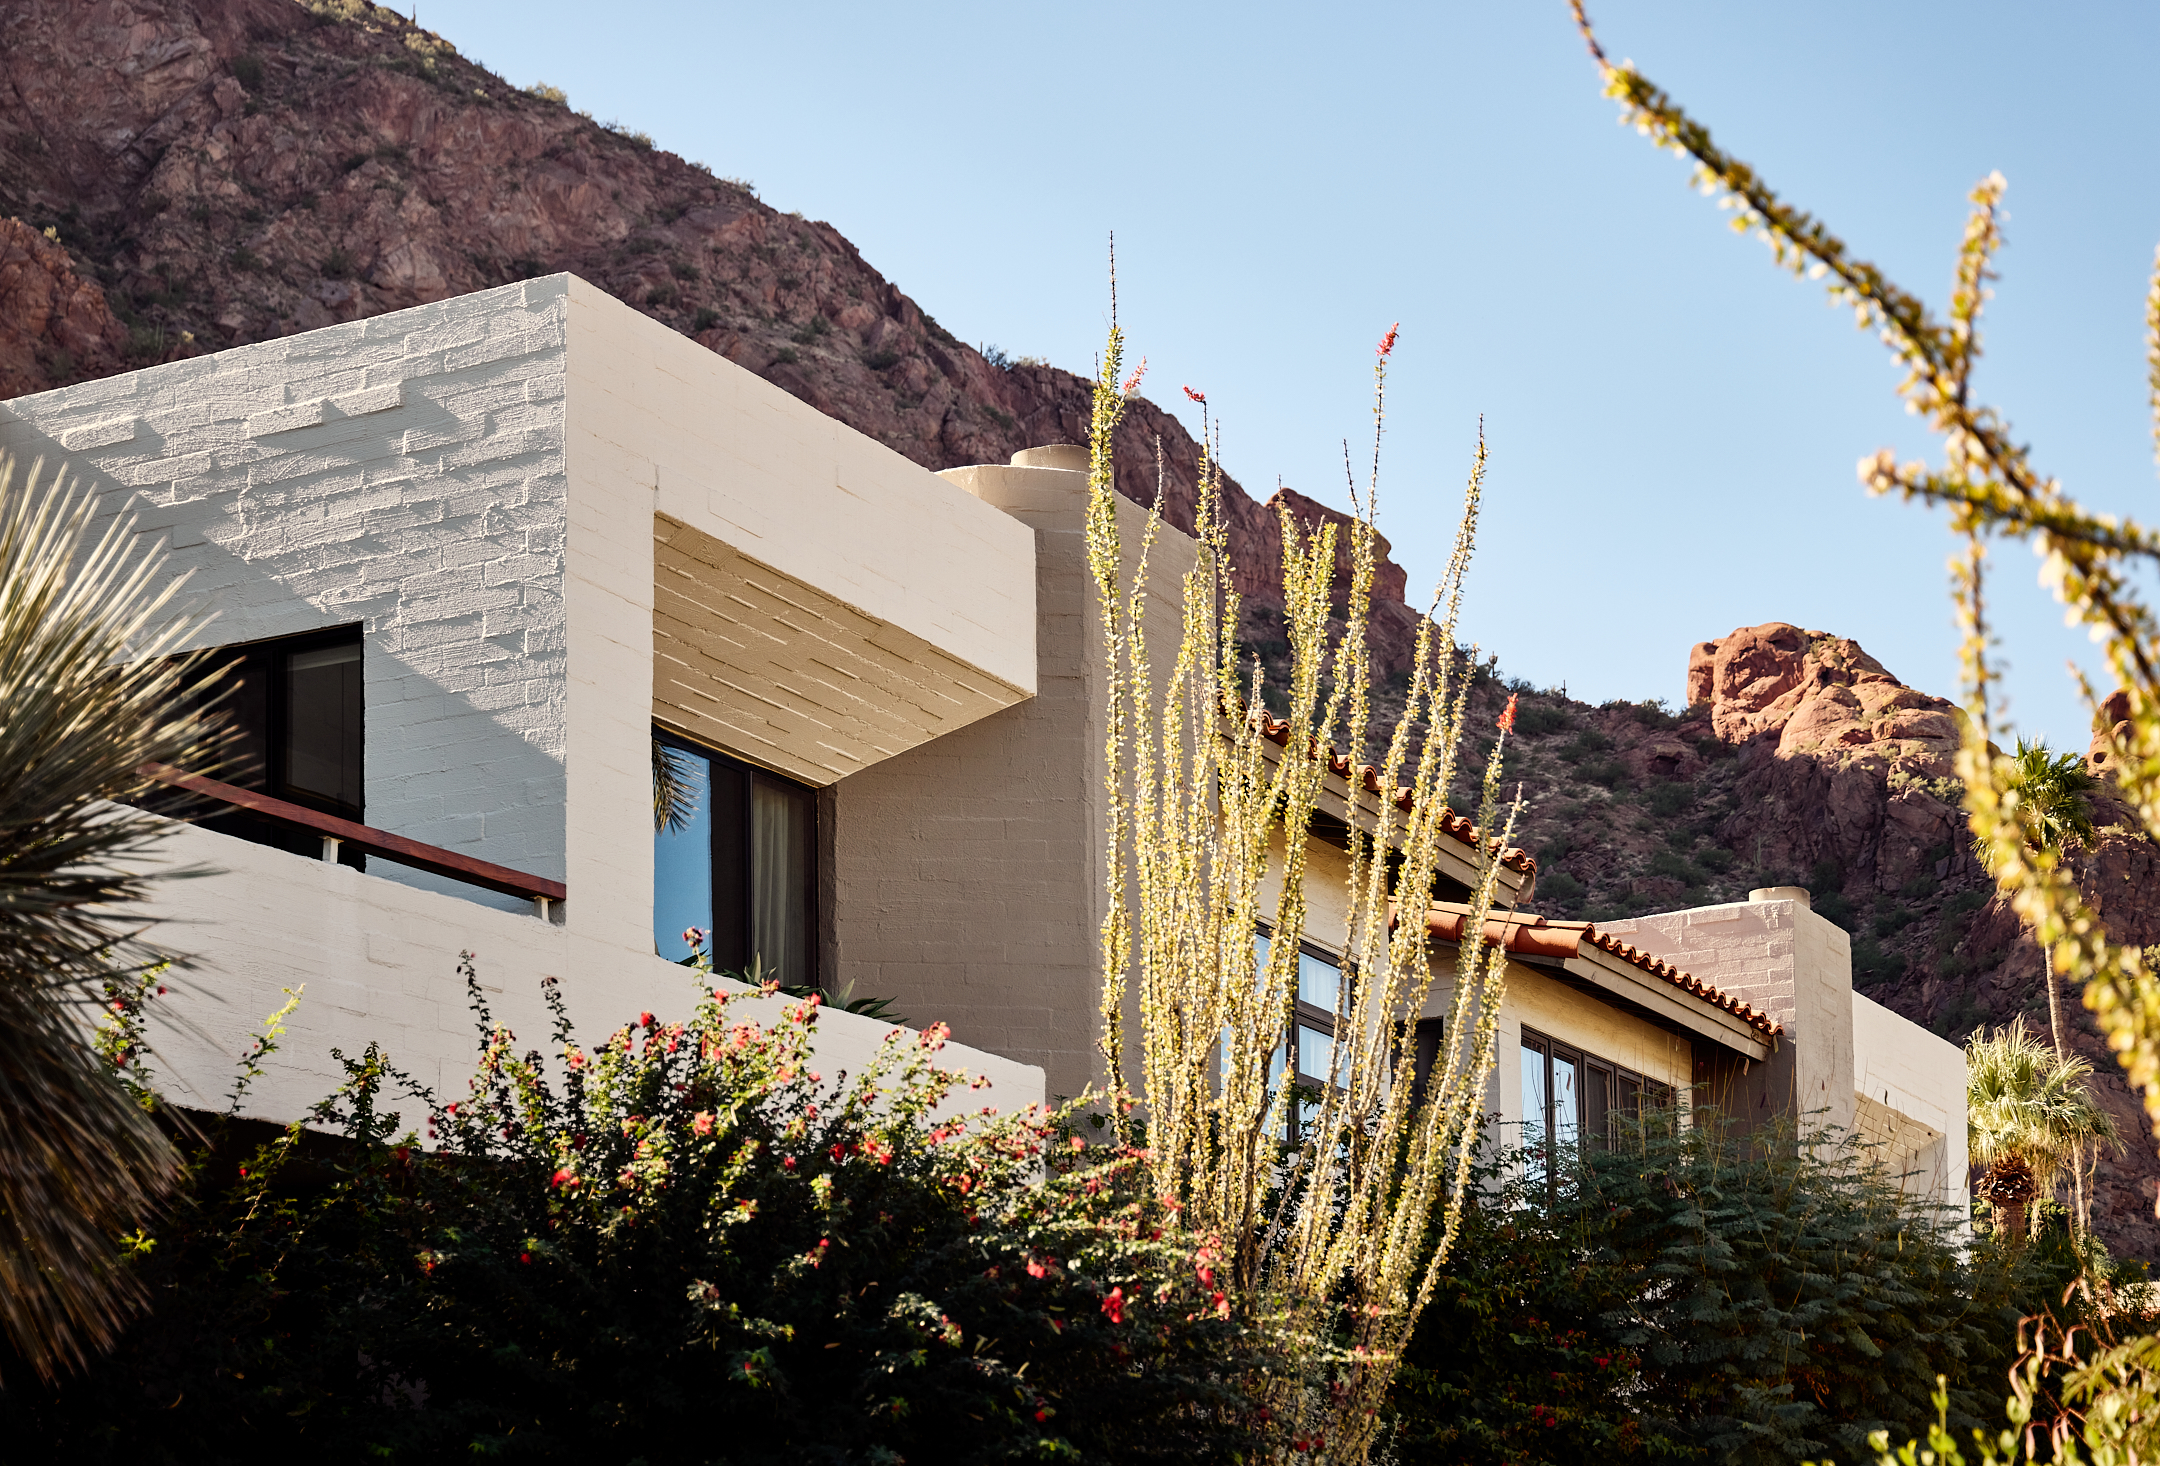 Mountain suite nestled into the side of Camelback Mountain.